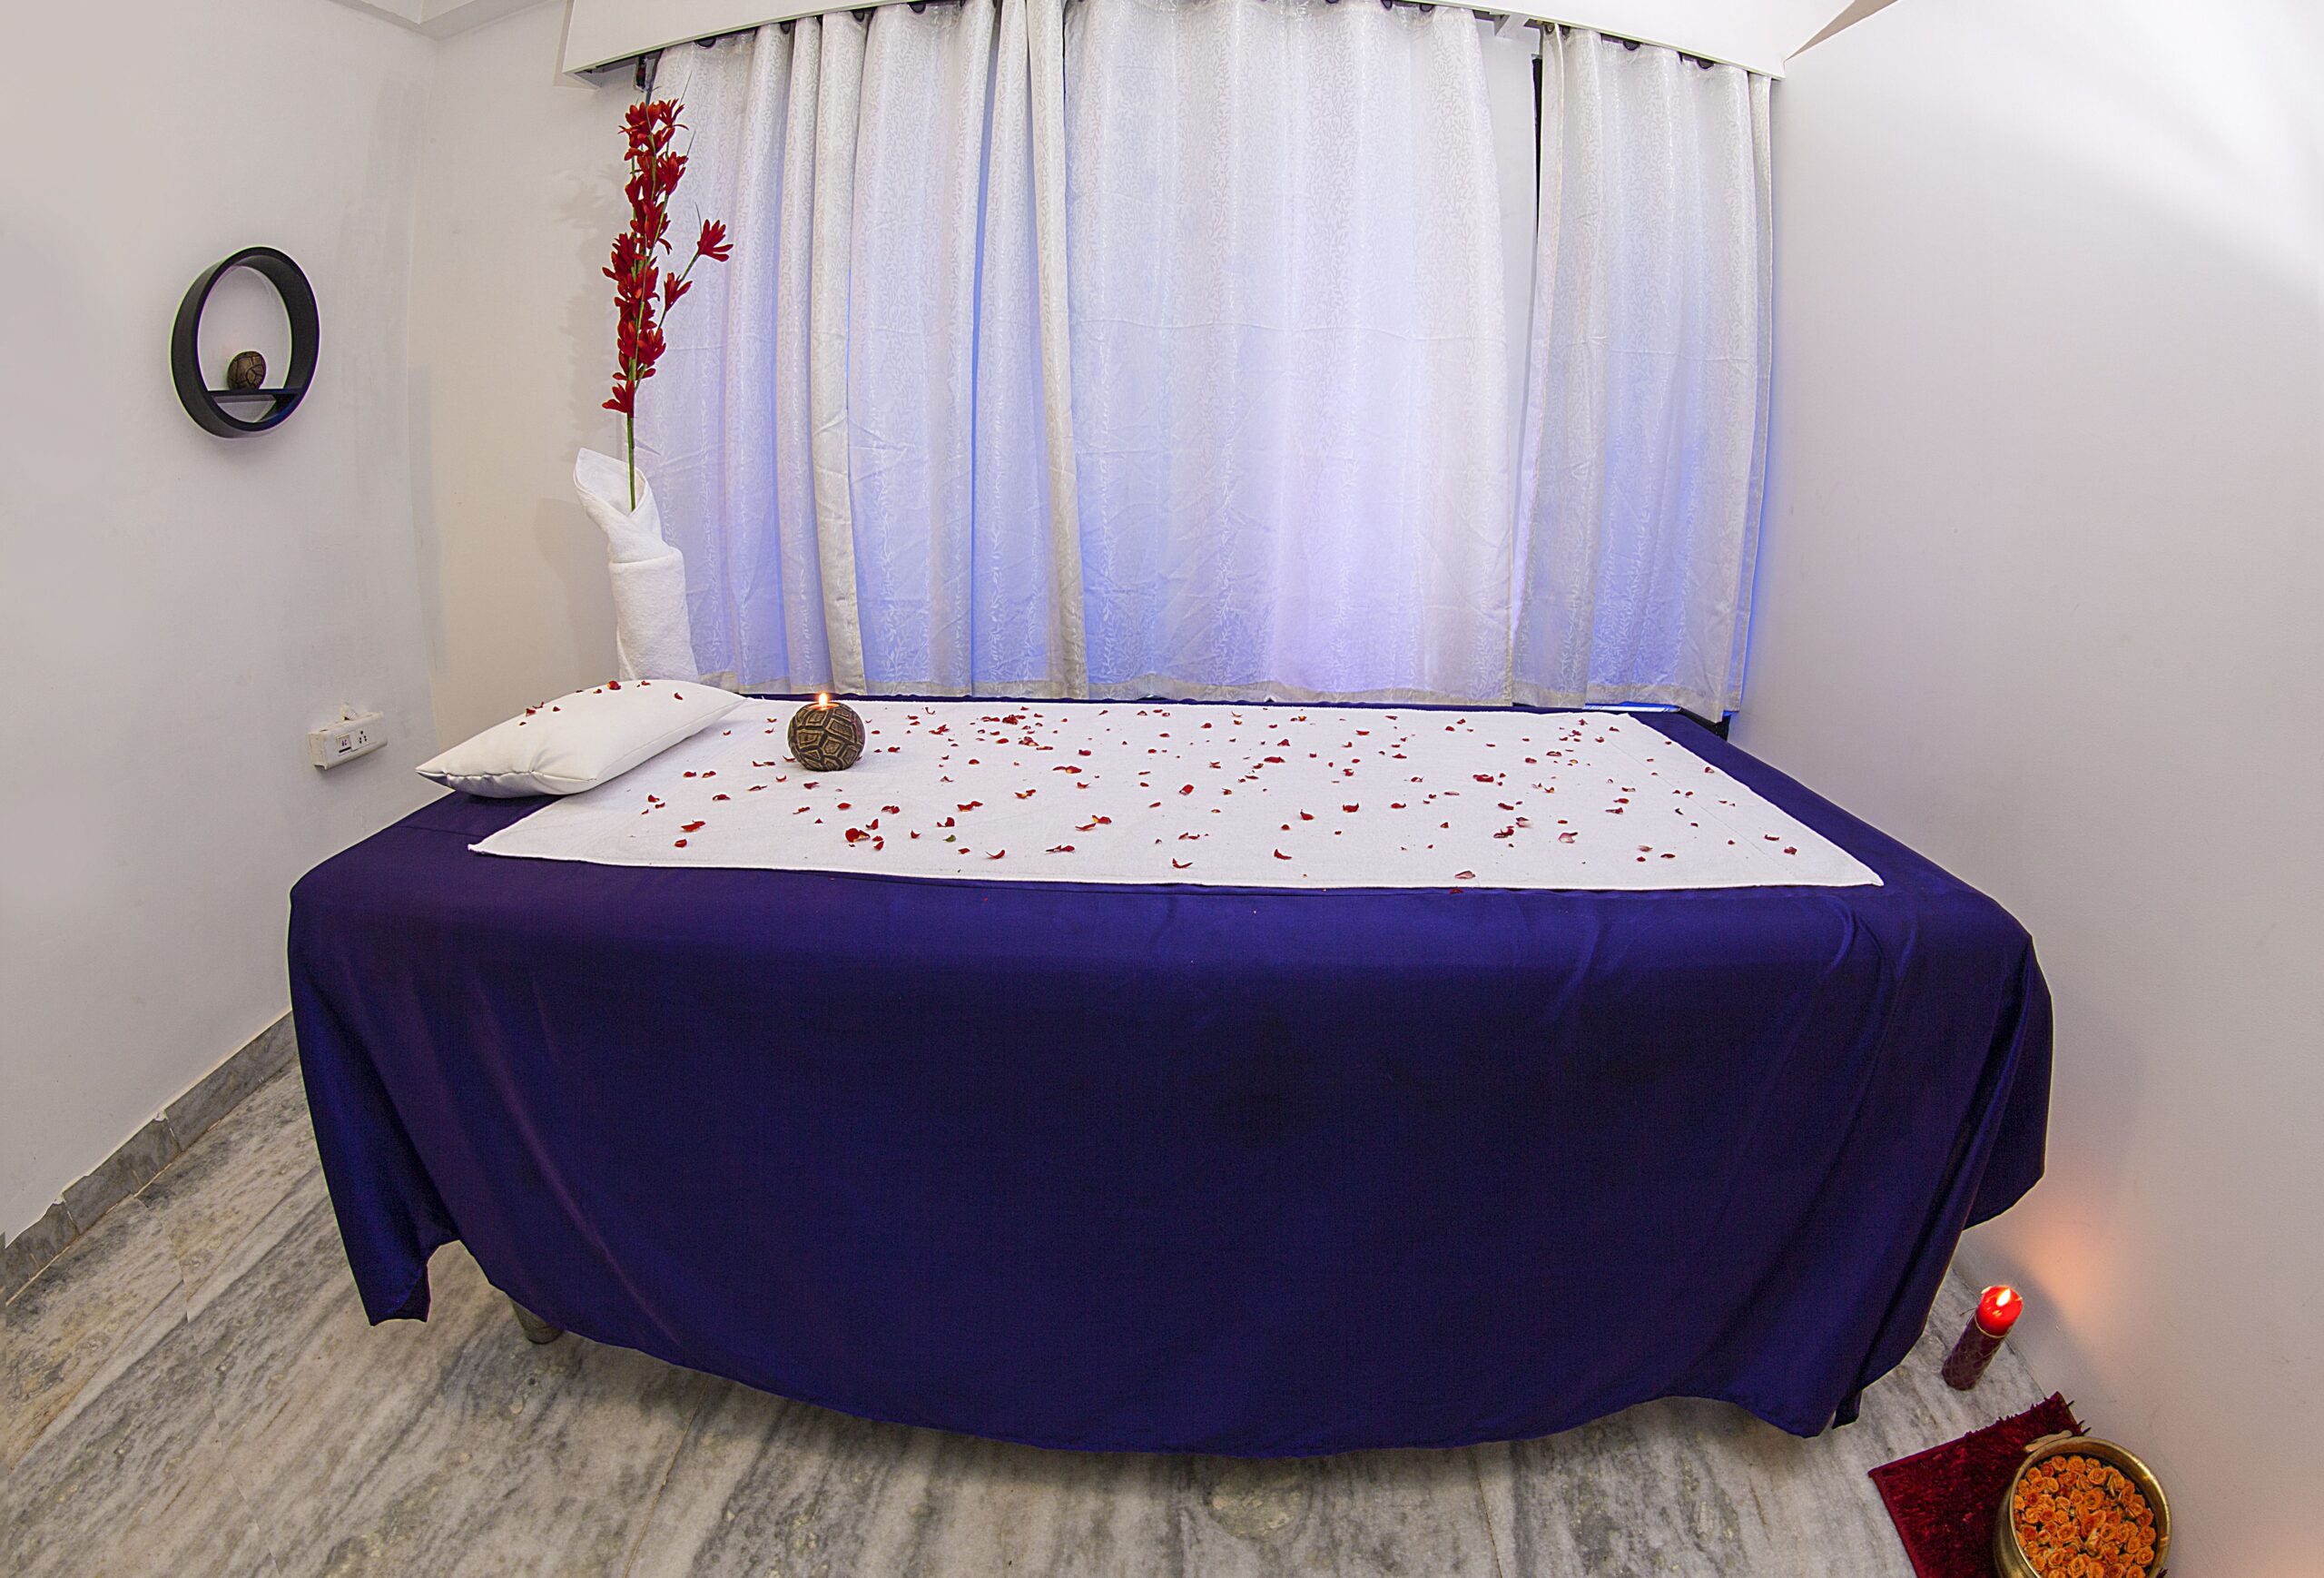 Side view of the beautifully decorated bed with flowers. A relaxed massage room in a spa with a flat bed and towels rolled on into it. Aromatic candles and fresh flowers are placed for freshness in the room.